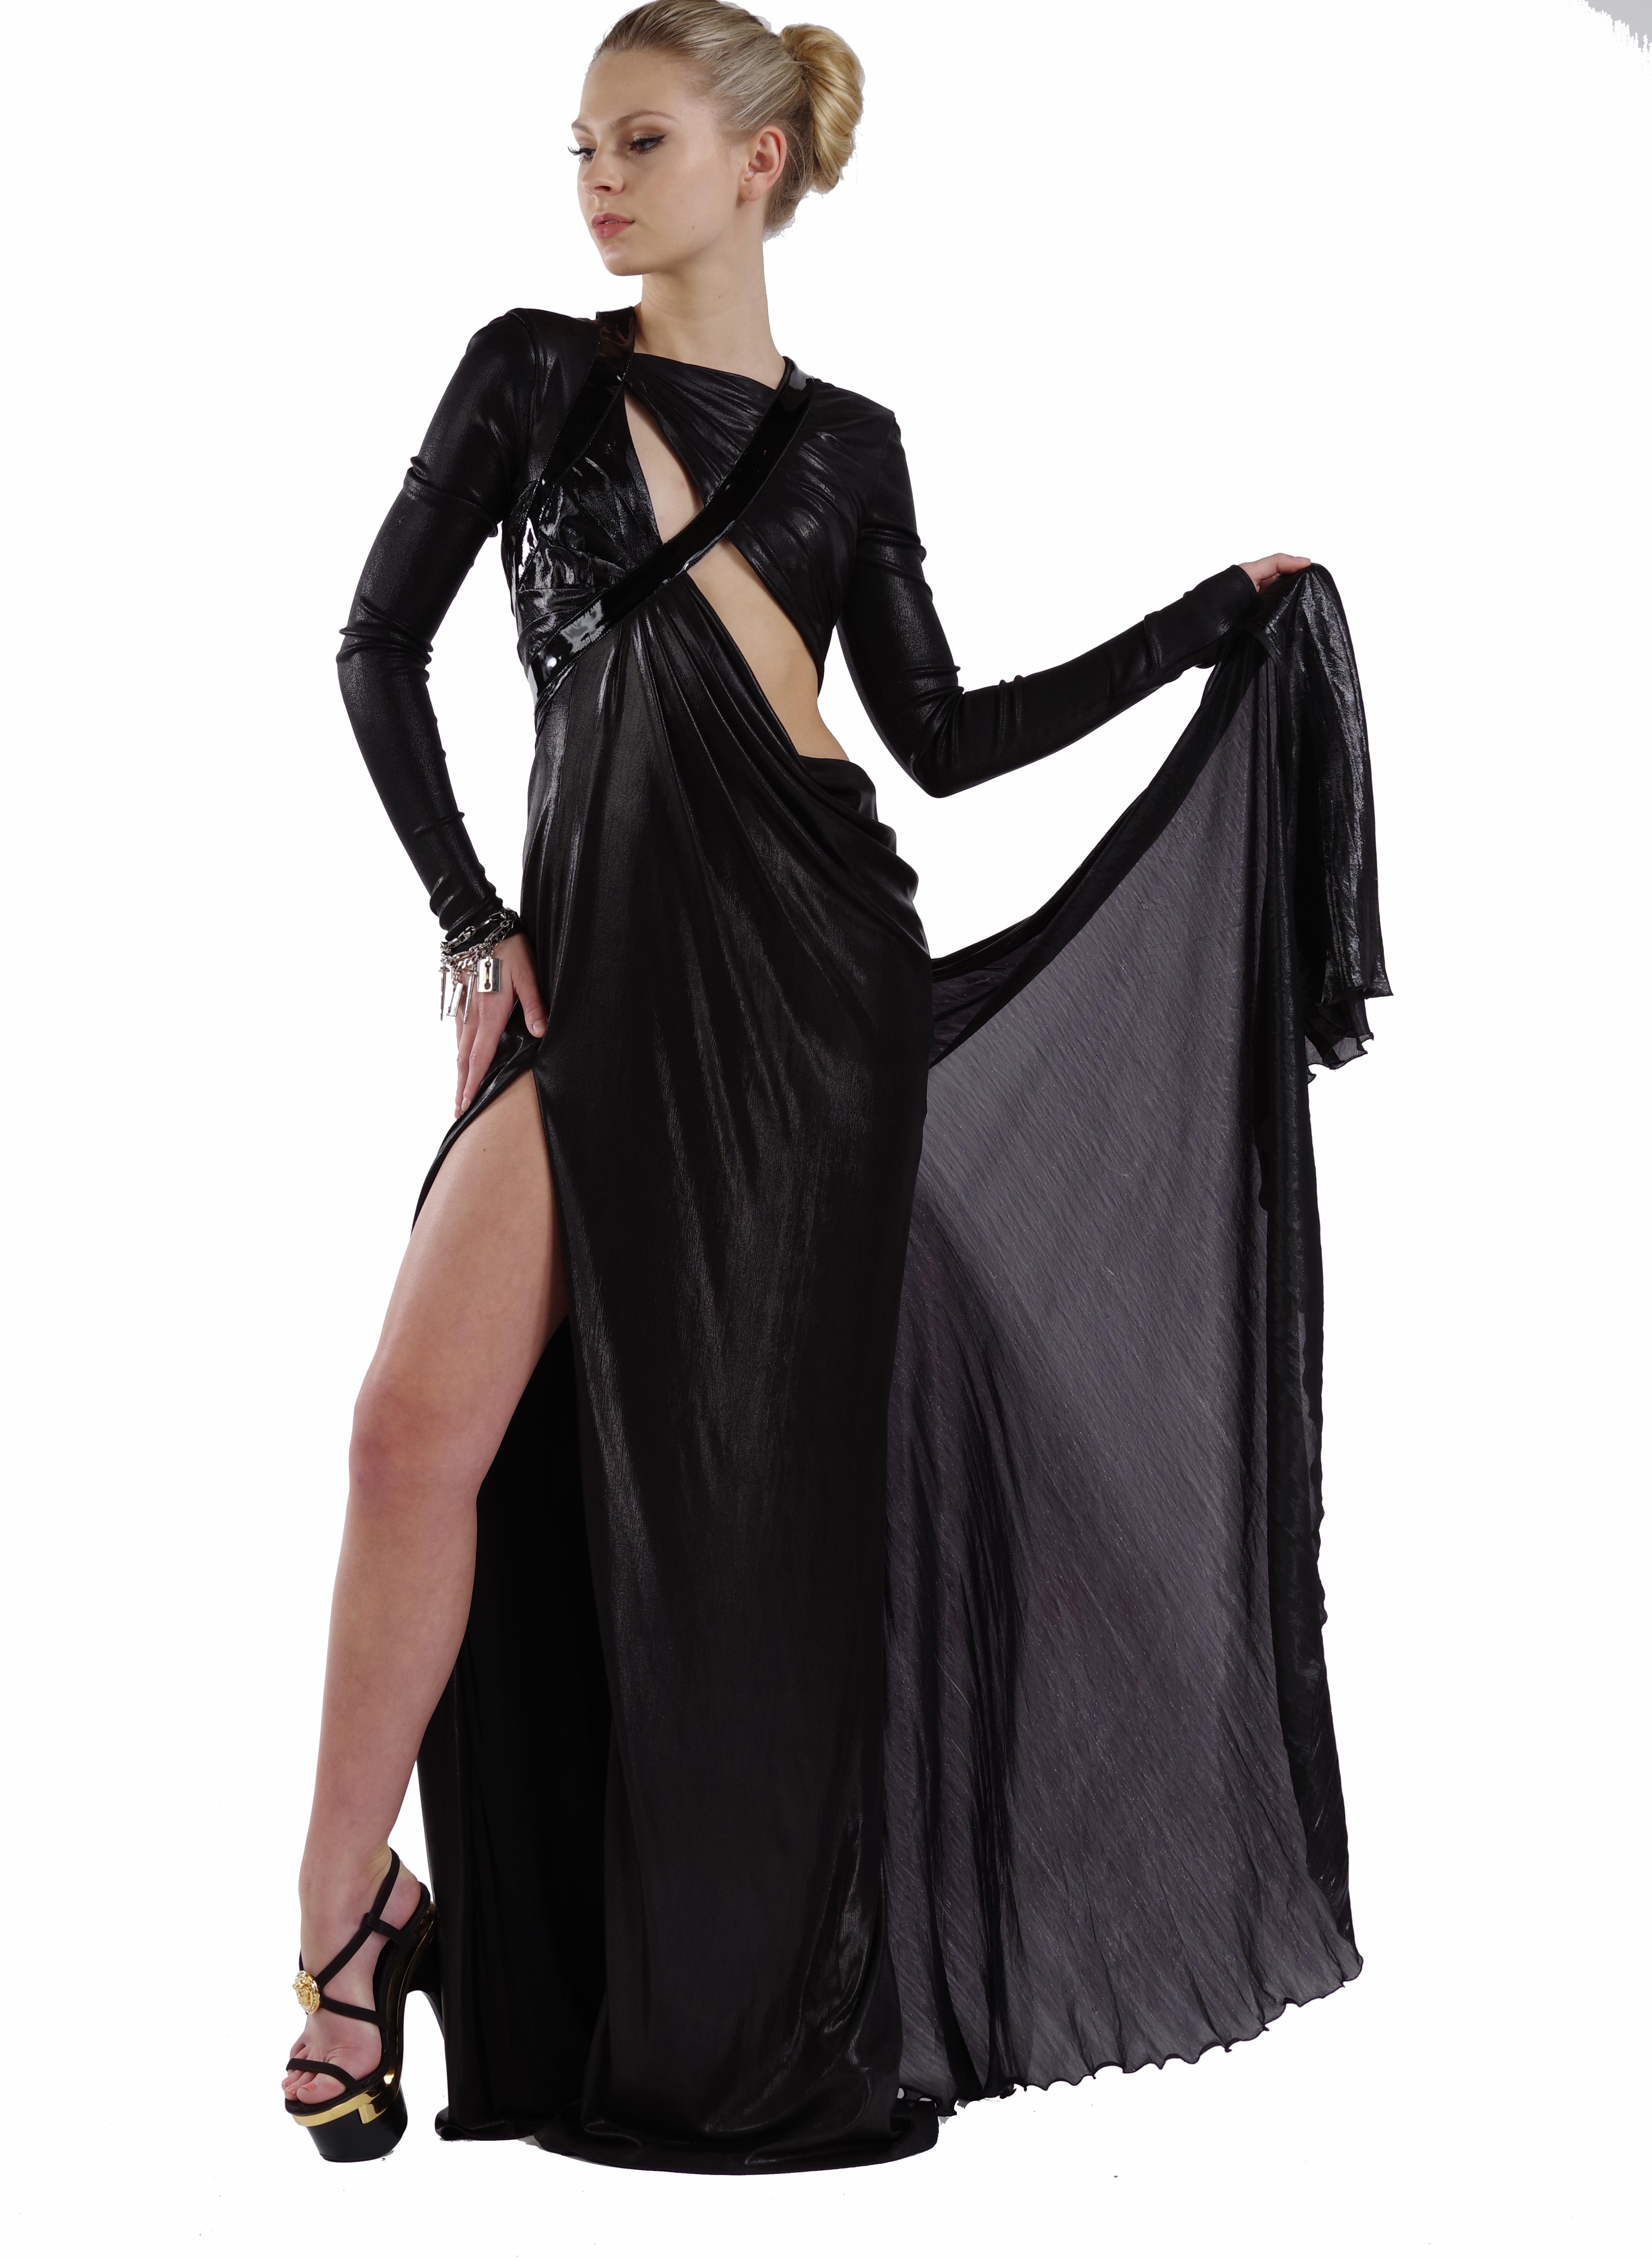 
VERSACE


This liquid jersey gown from Versace features cutout shoulder detail, 

full-length vinyl sleeves with zip accents, 

and a floor-sweeping skirt with thigh-high slit.

Size 40 or US 4

Made in Italy

Pre-owned, VERY good condition!

100%